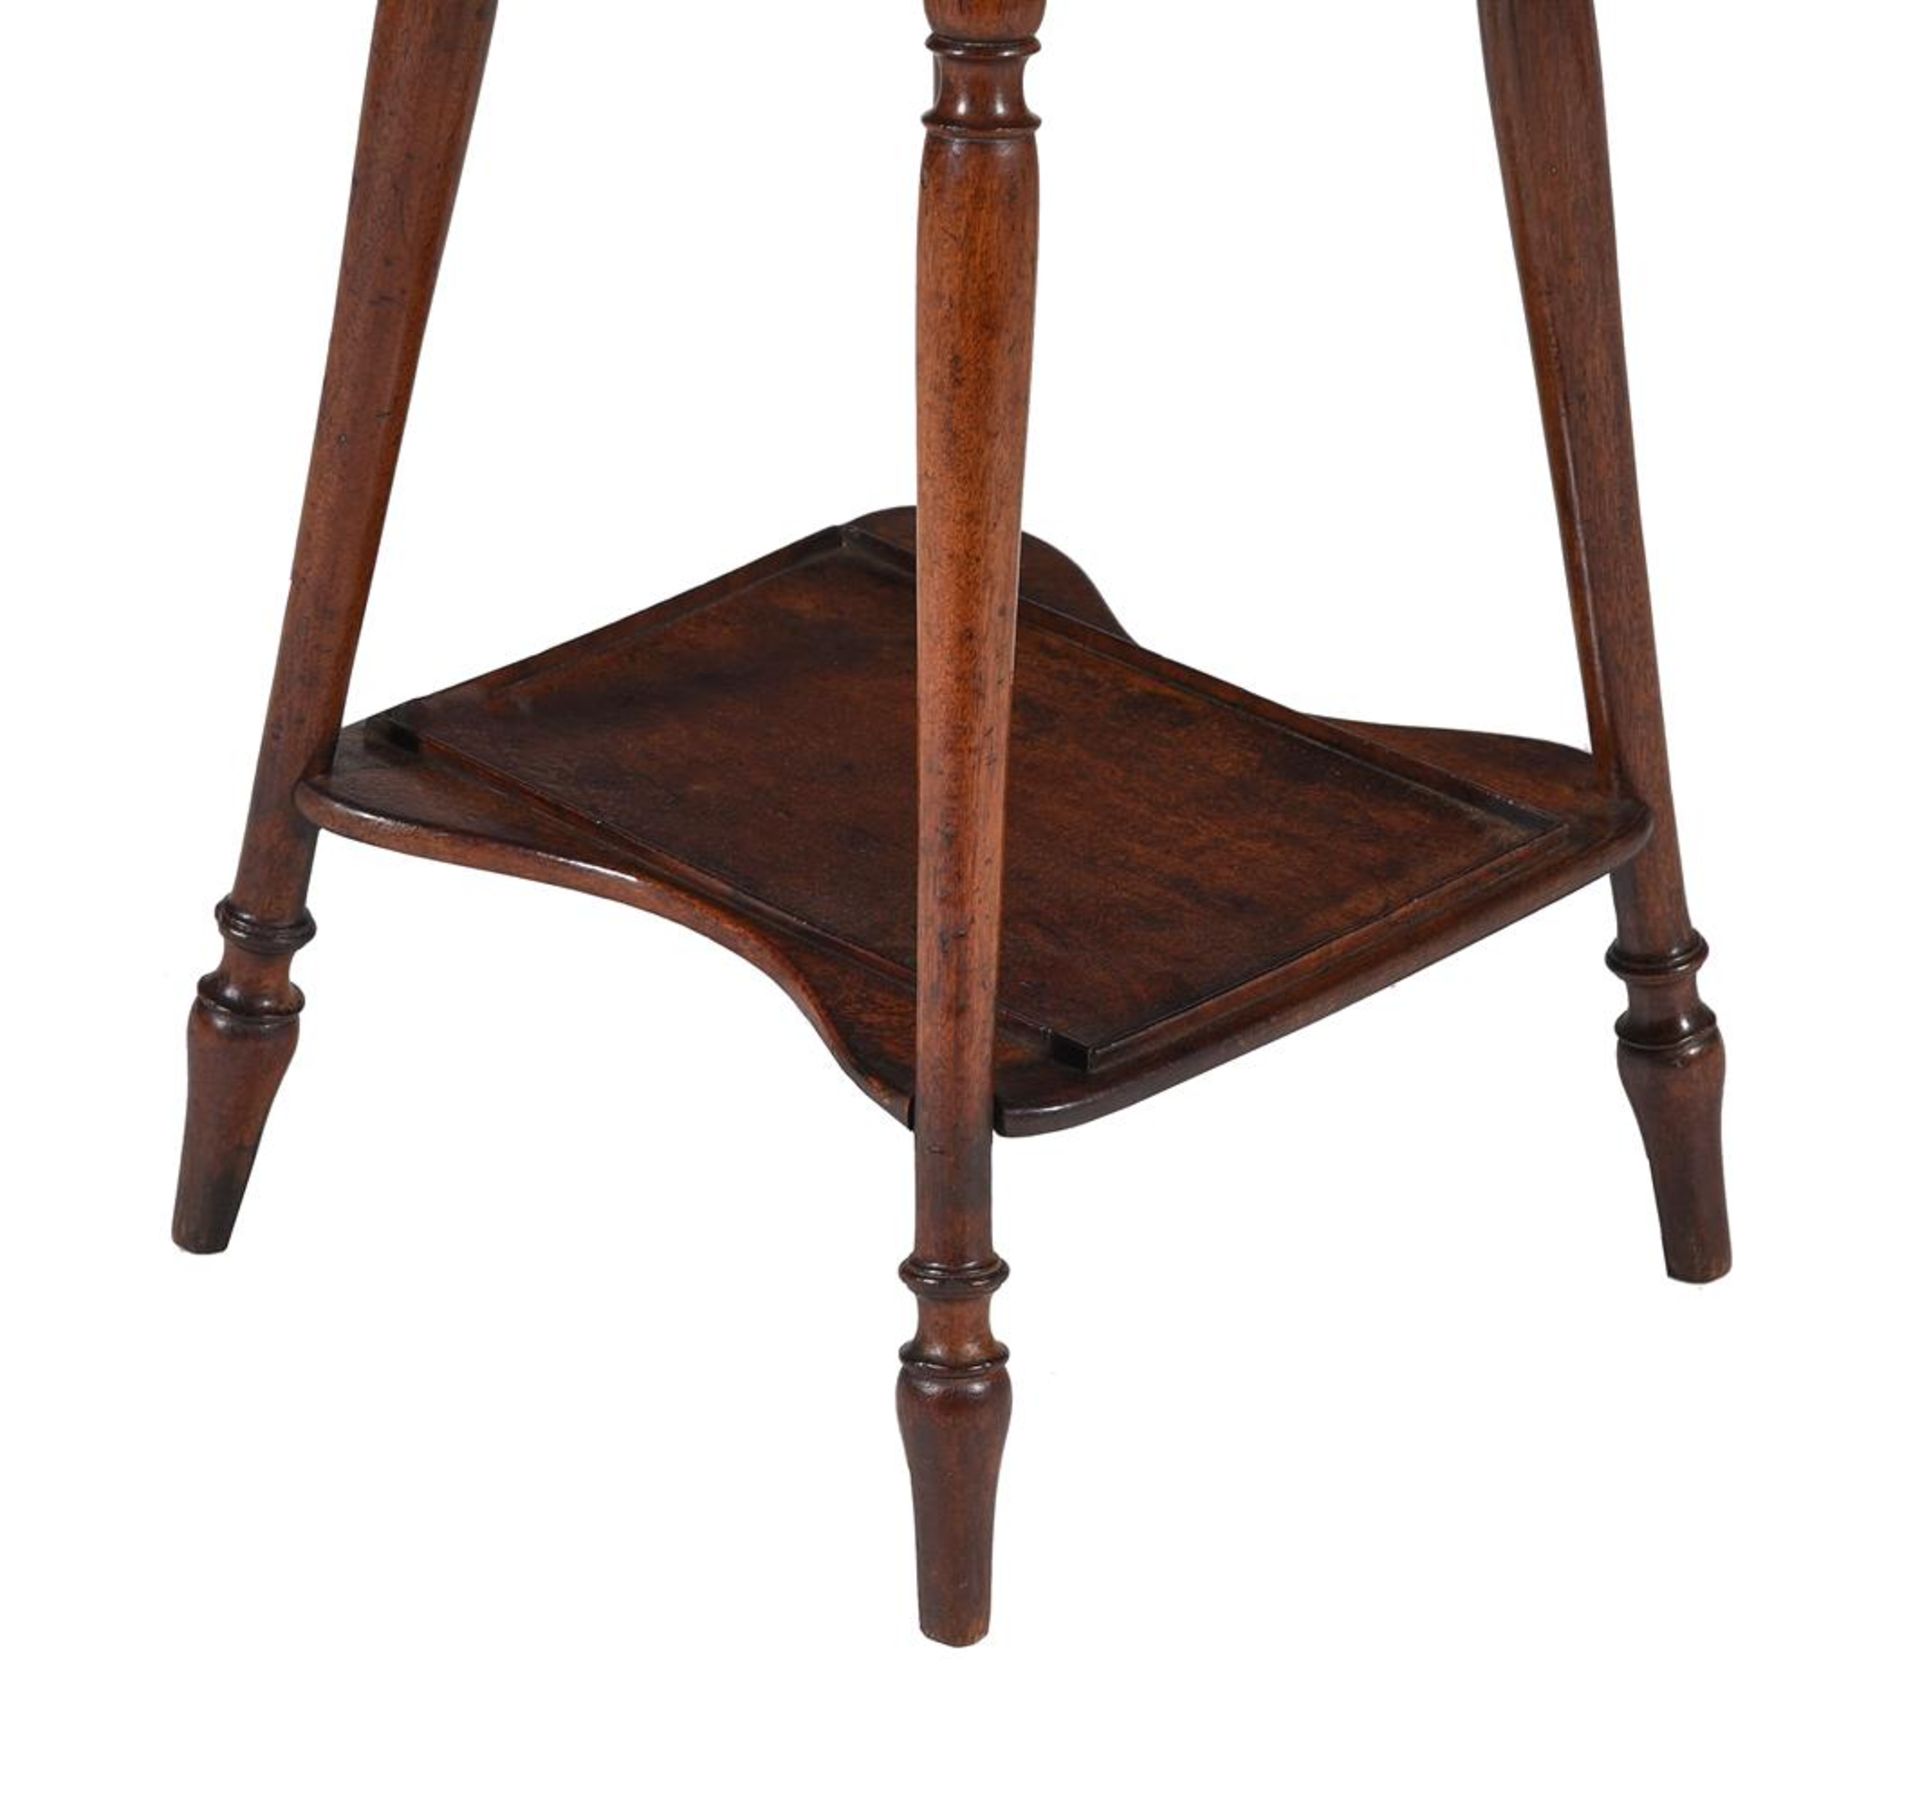 A REGENCY MAHOGANY PLATE STAND, AFTER A DESIGN BY GILLOWS, CIRCA 1815 - Image 3 of 4